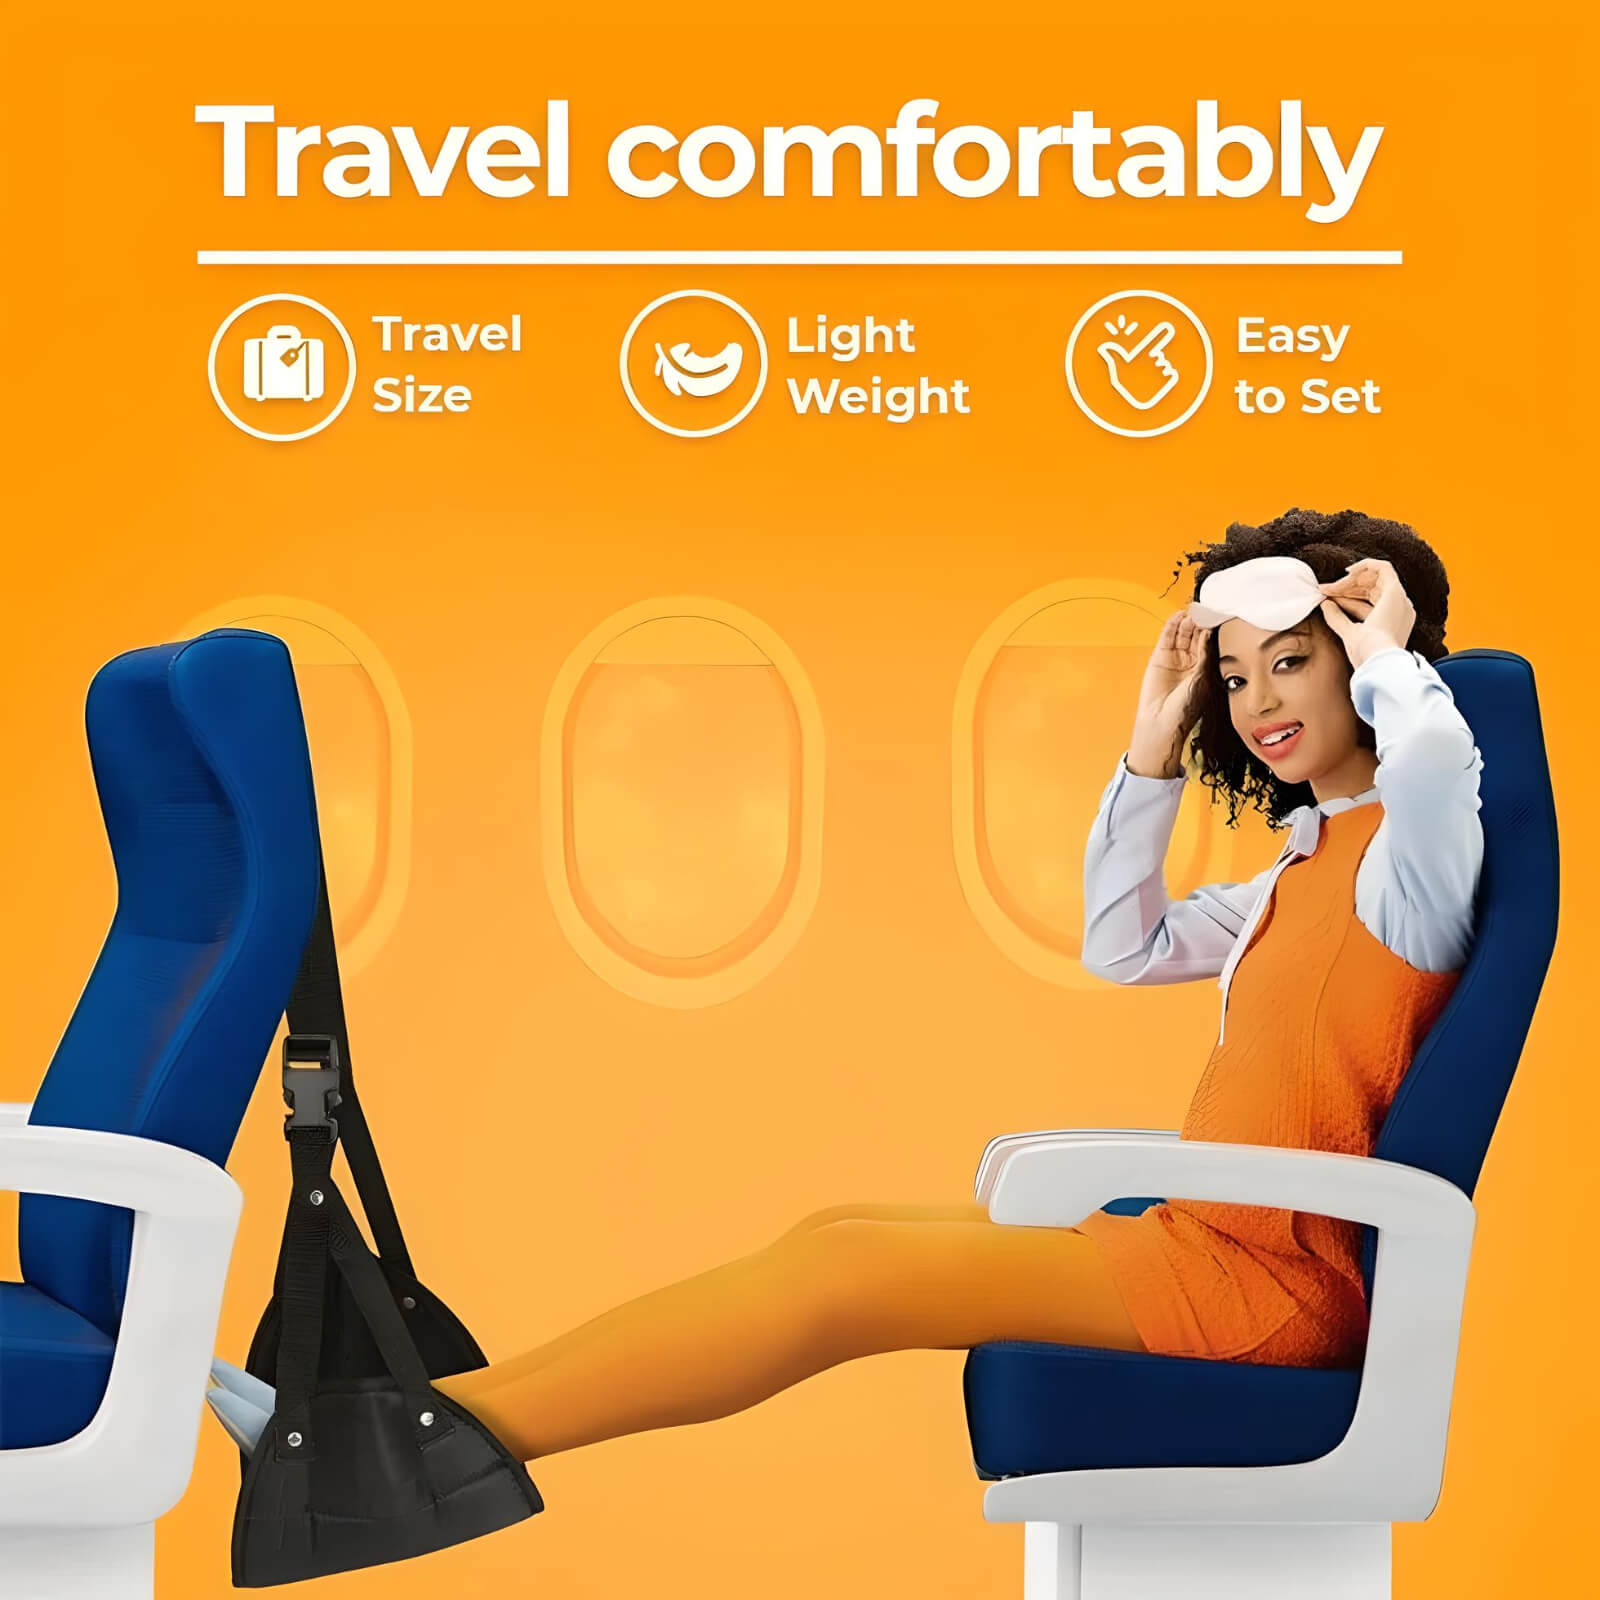 inflatable-foot-rest-travel-comfort-ably